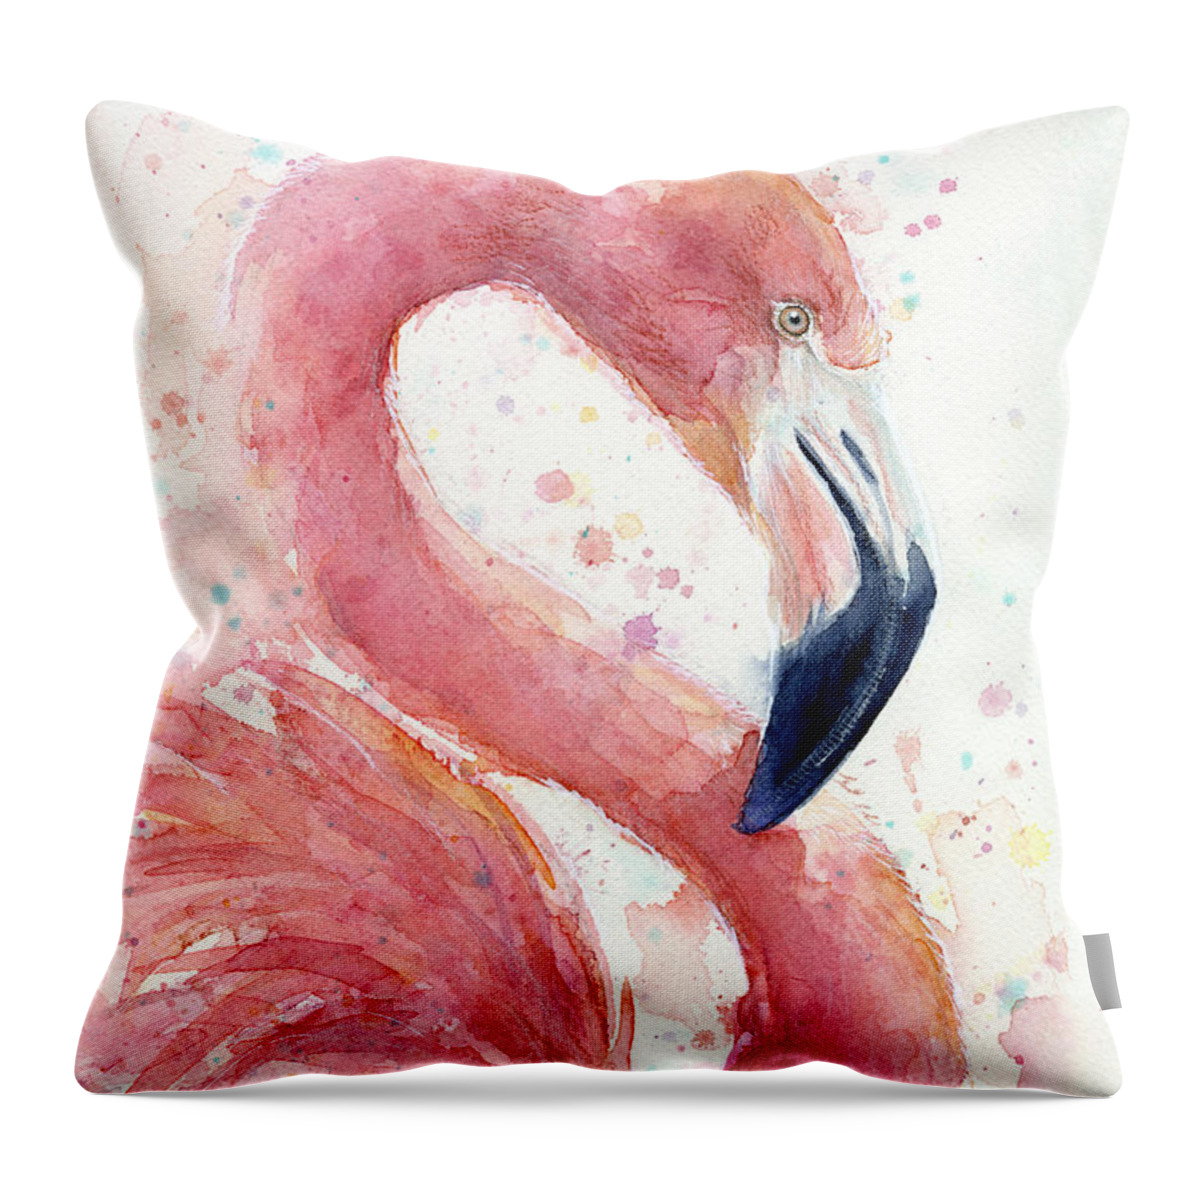 Watercolor Flamingo Throw Pillow featuring the painting Flamingo - Facing Right by Olga Shvartsur